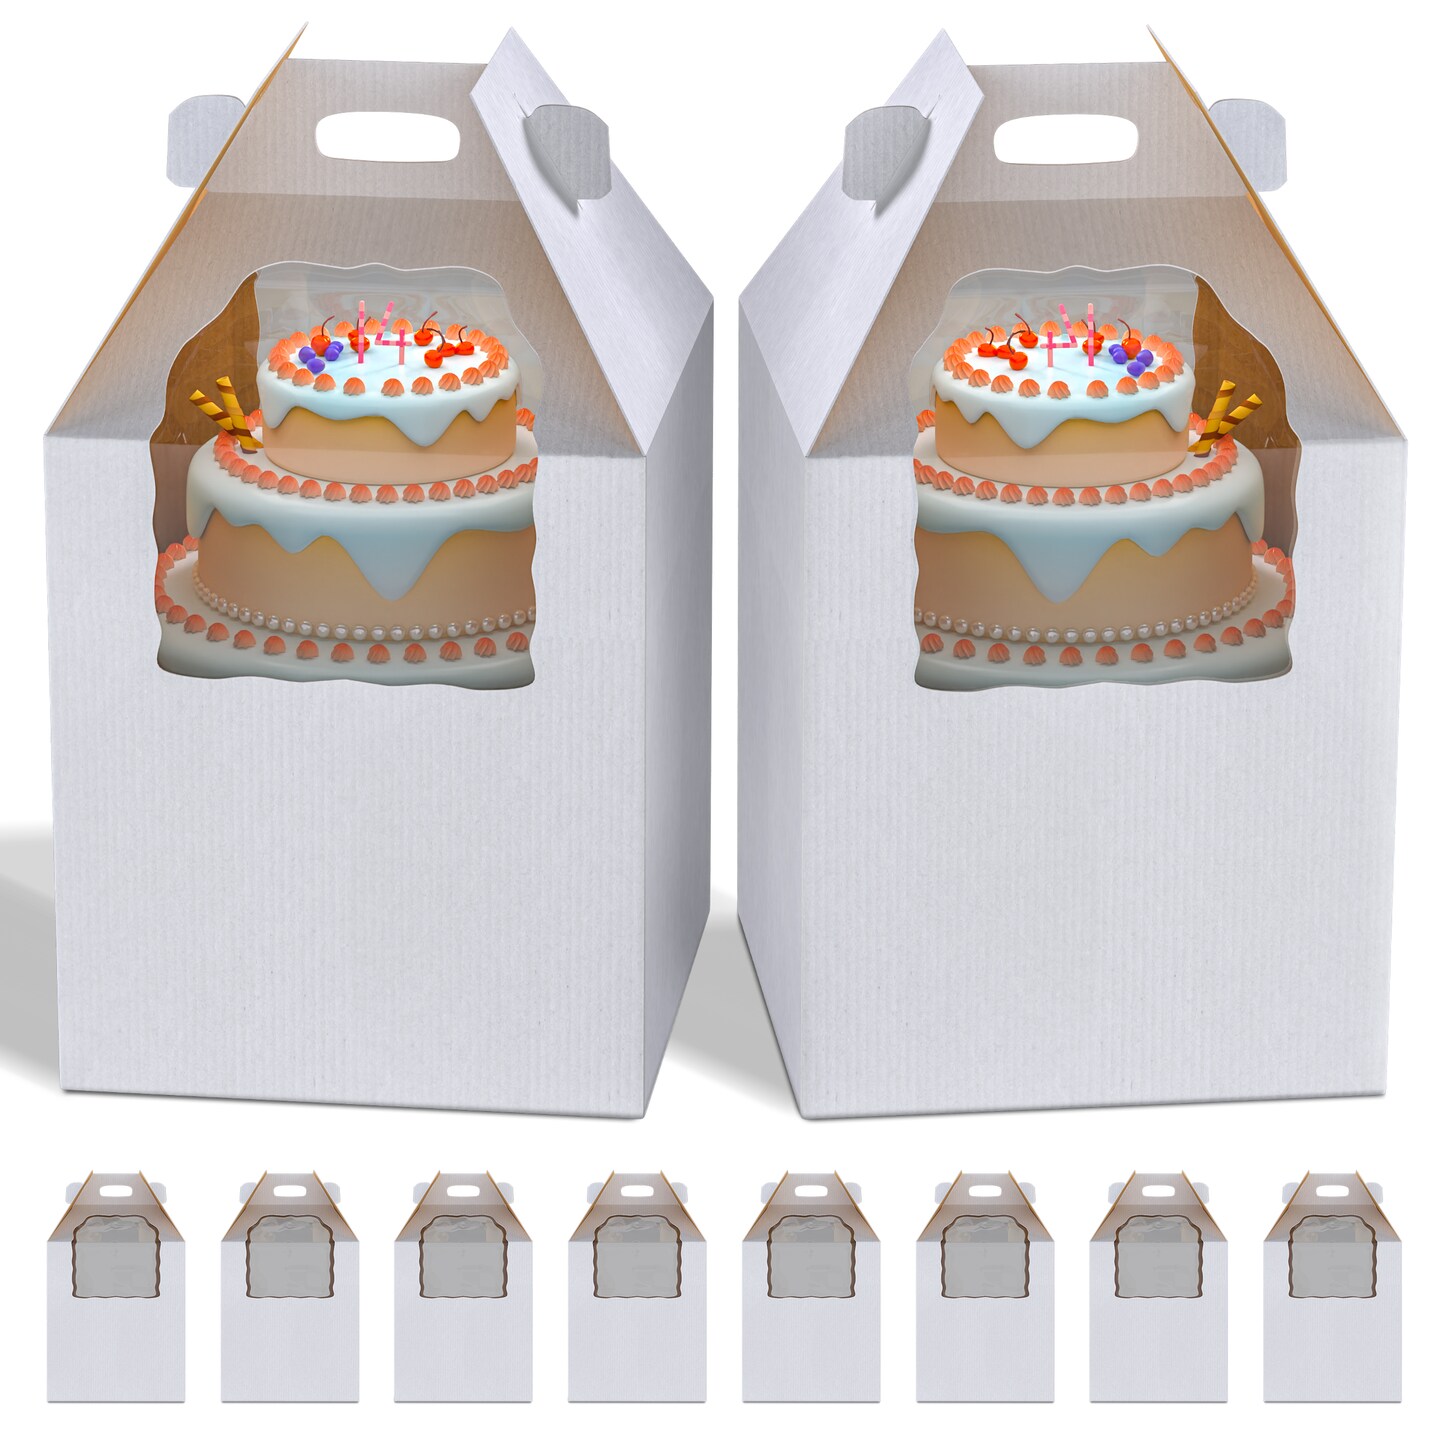 Spec101 Disposable Cake Carrier with Window Tall Cake Boxes 10pk for Tier Cakes